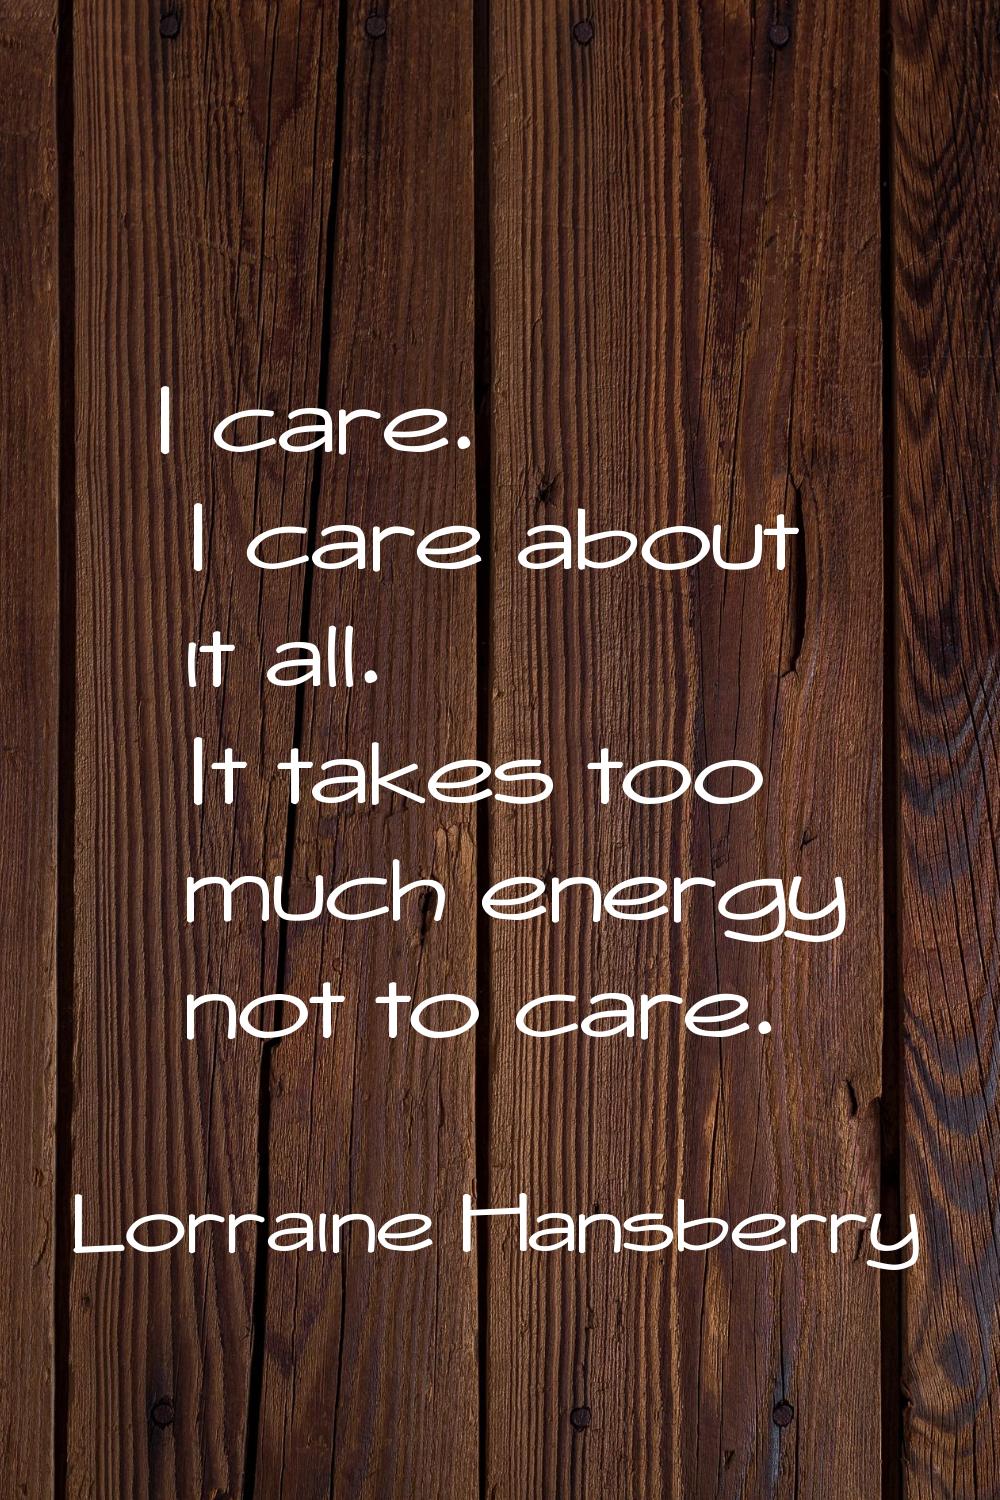 I care. I care about it all. It takes too much energy not to care.